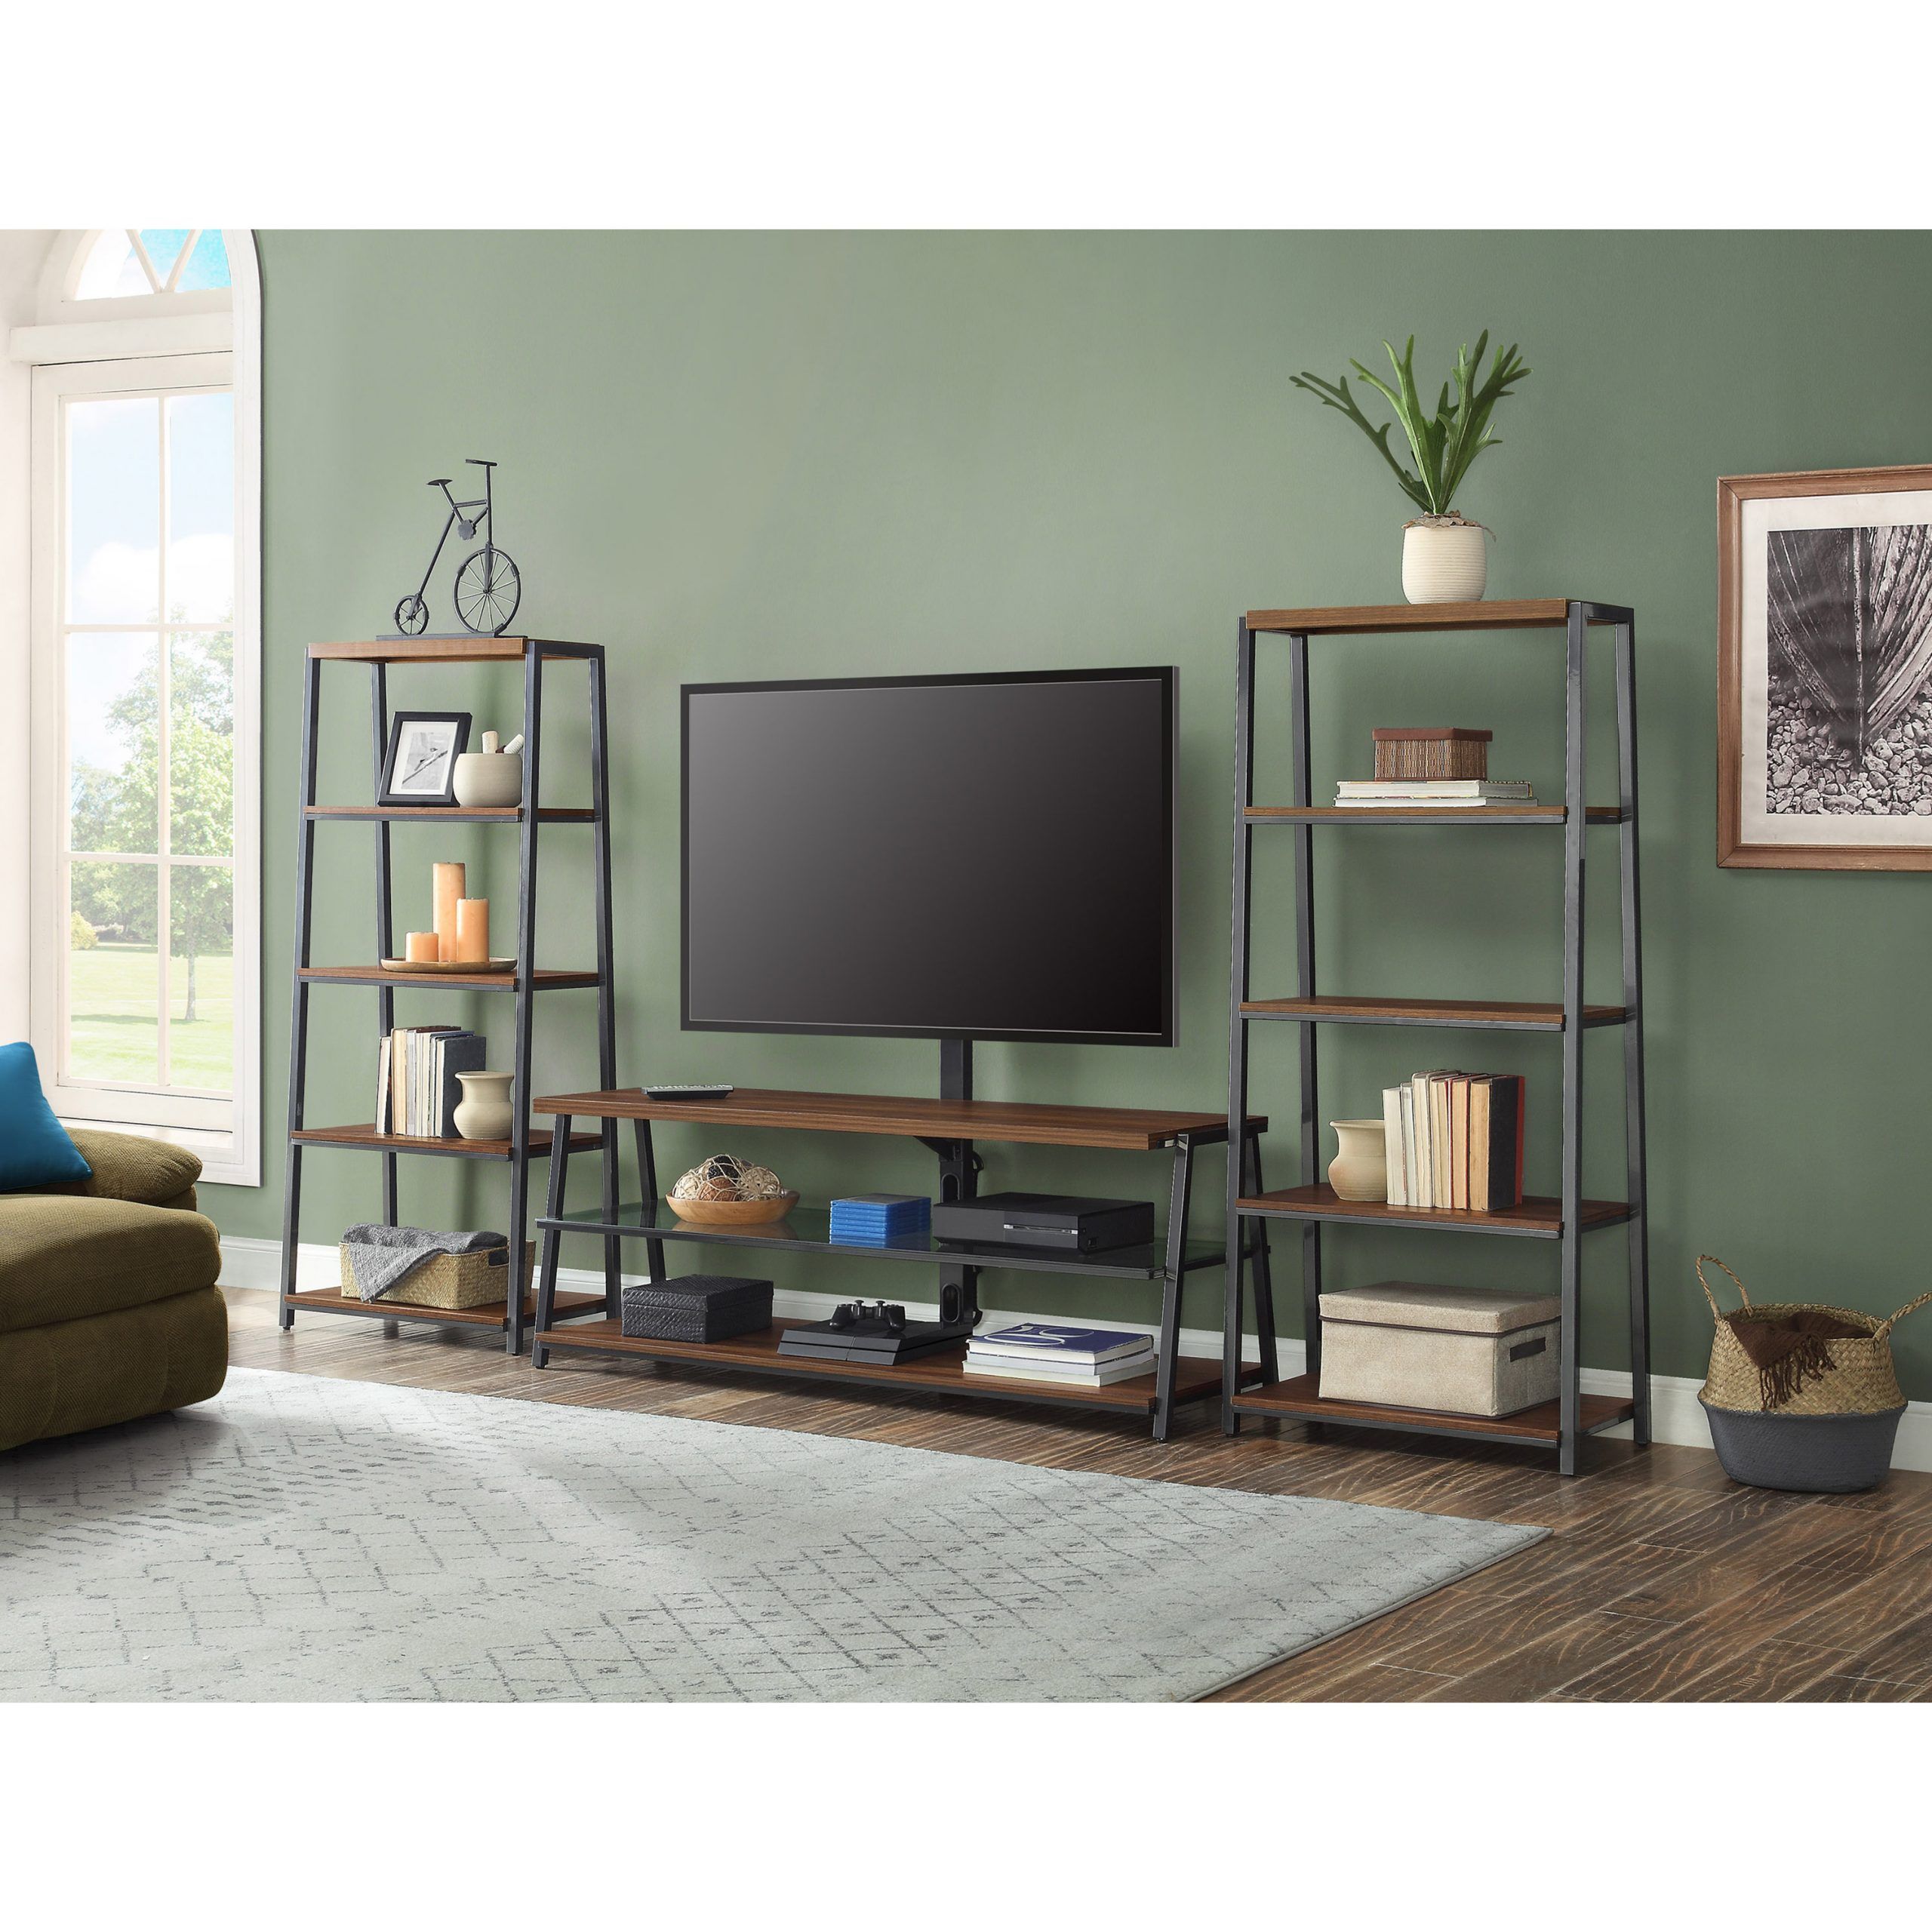 Mainstays Arris 3 In 1 Tv Stand For Televisions Up To 70 In Mainstays Arris 3 In 1 Tv Stands In Canyon Walnut Finish (Gallery 14 of 20)